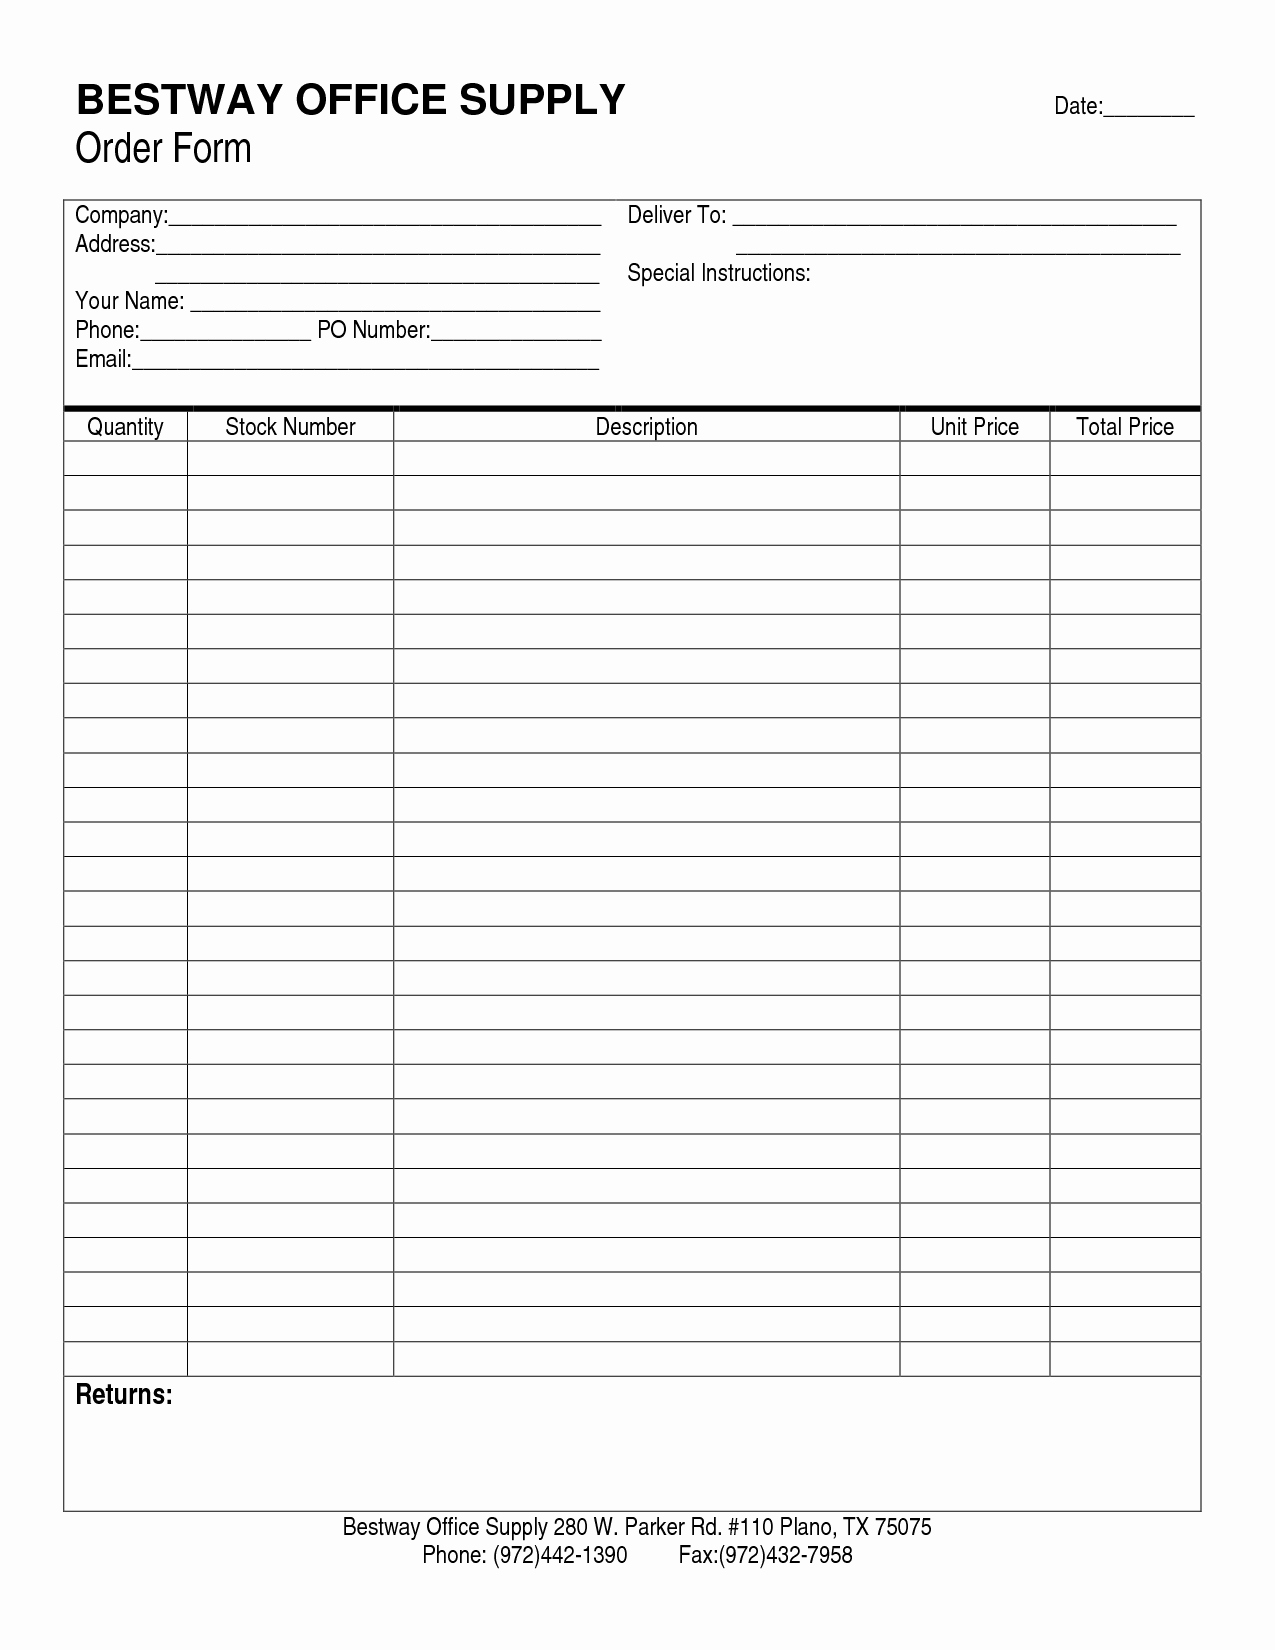 Supply order form Template Awesome Fice Supply order Techieblogiefo